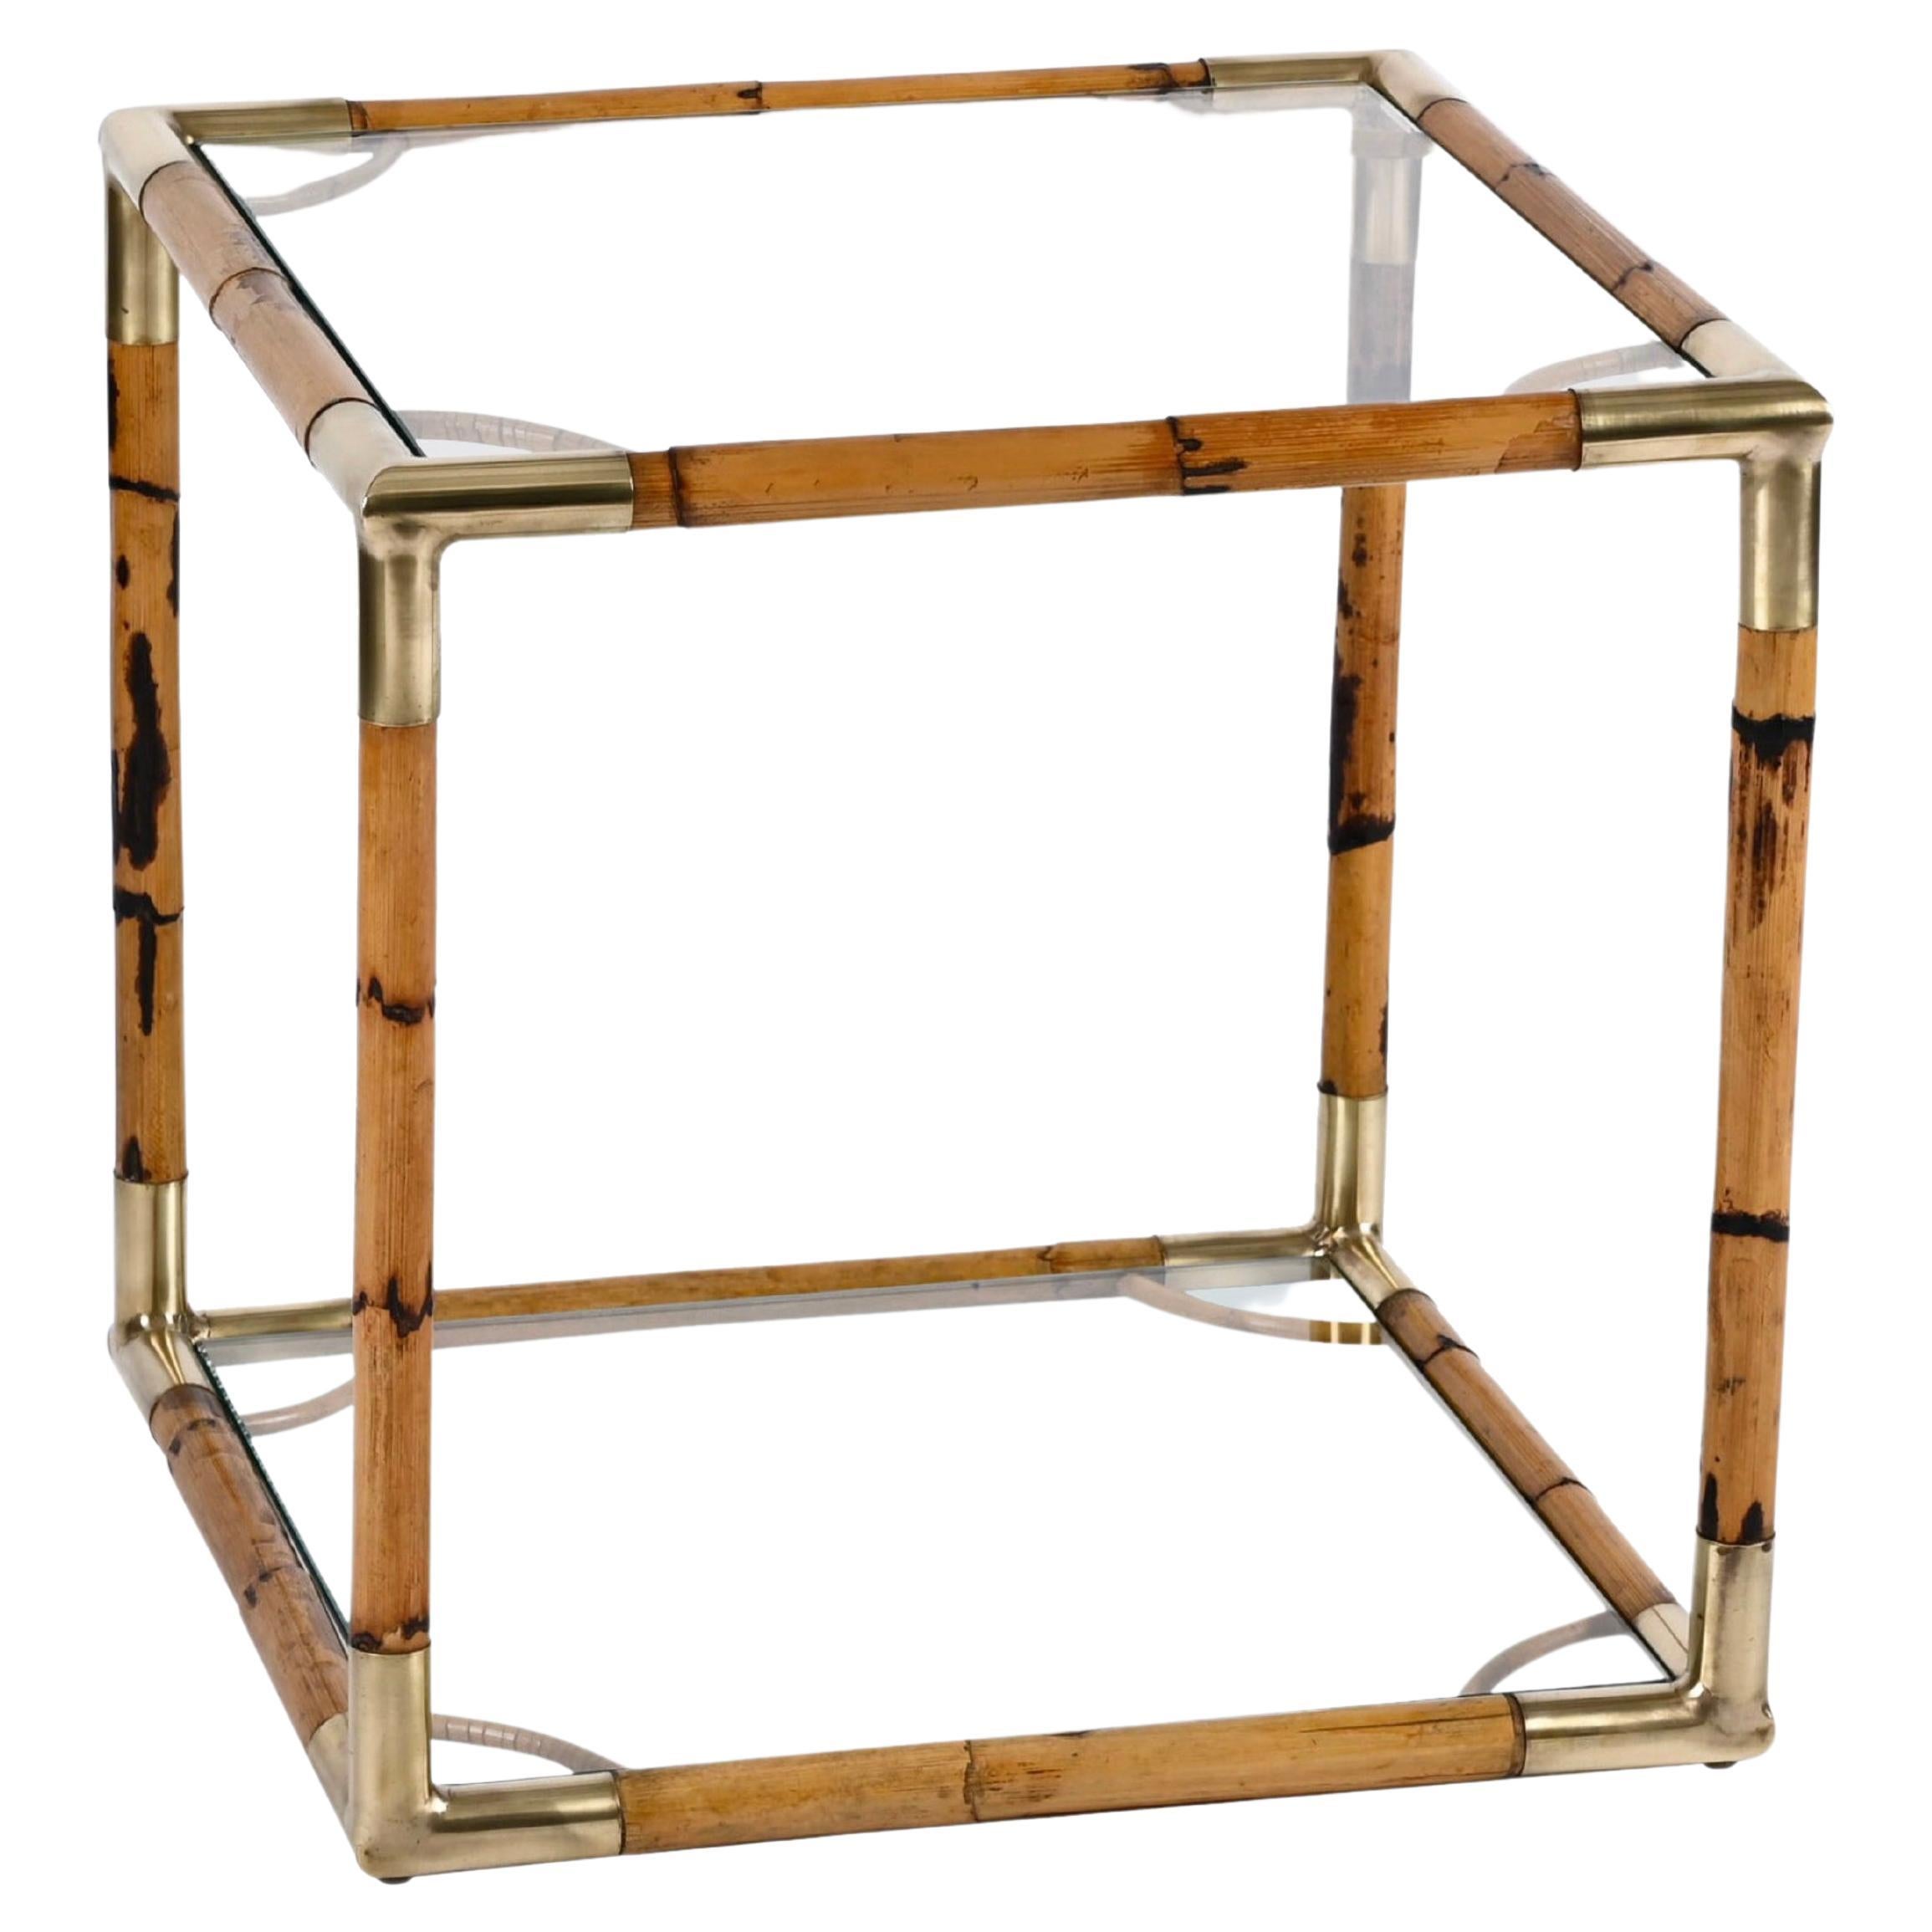 Incredible midcentury bamboo, brass and crystal glass cubic coffee table. This fantastic piece was designed in Italy during the 1960s.

The solid structure of this astonishing table, made of bamboo straight lines kept together by the glass shelf and